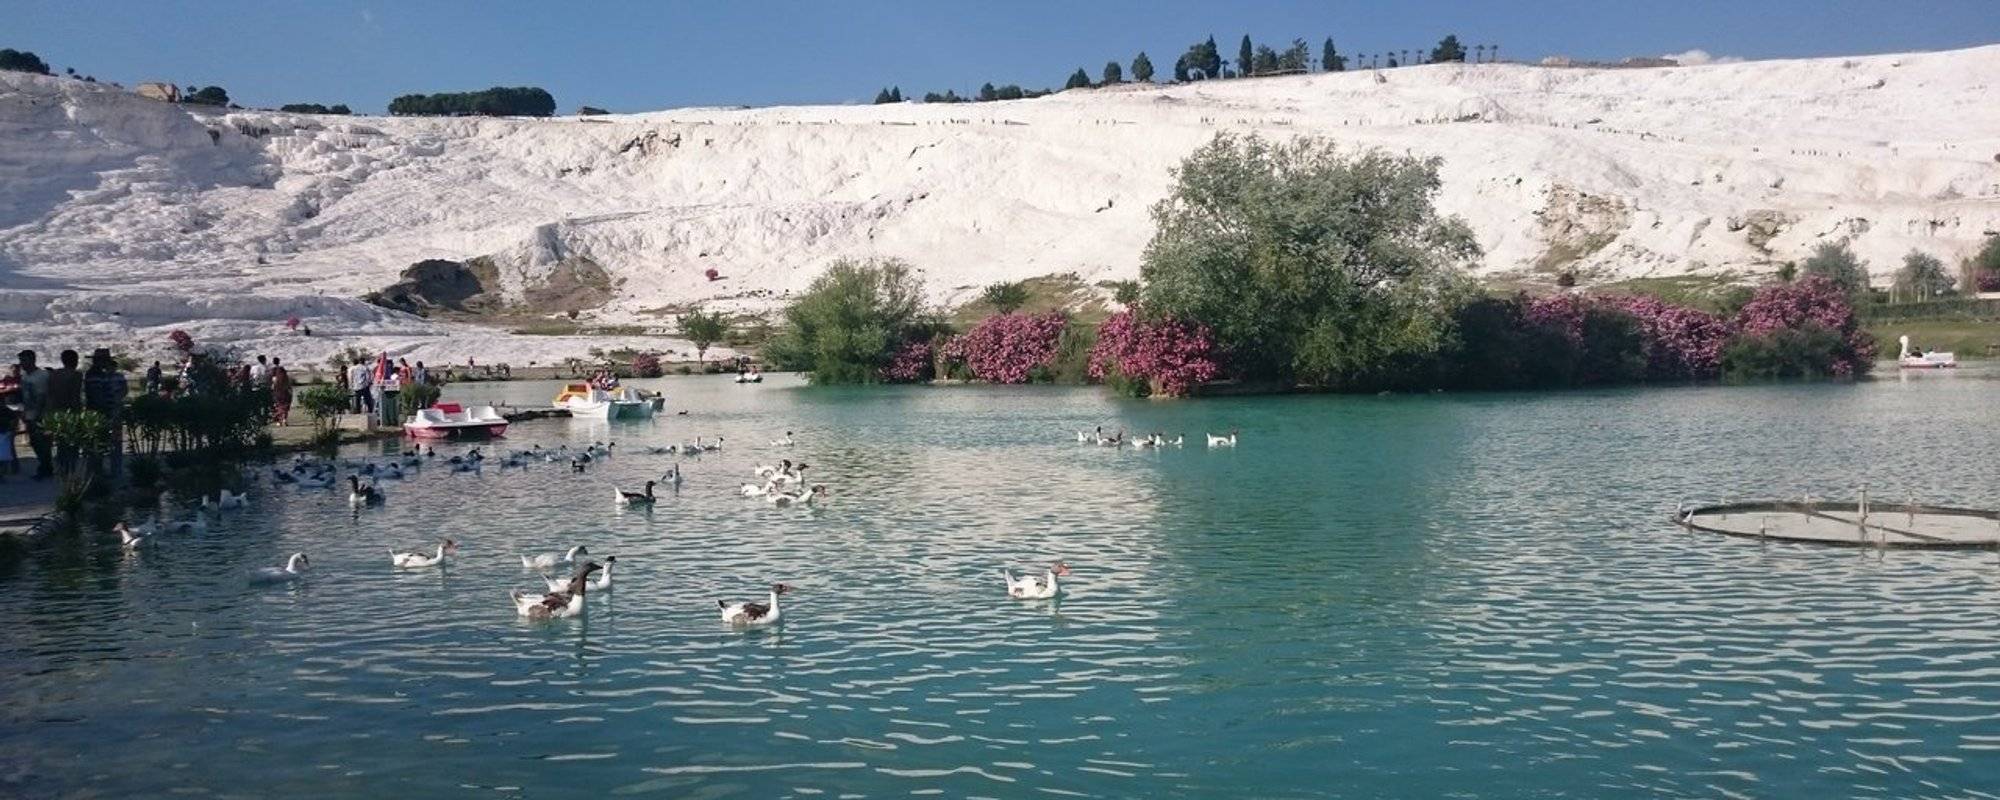 #Travel diary 12- Welcome to white paradise of Turkey: Pamukkale & Hierapolis Ancient City